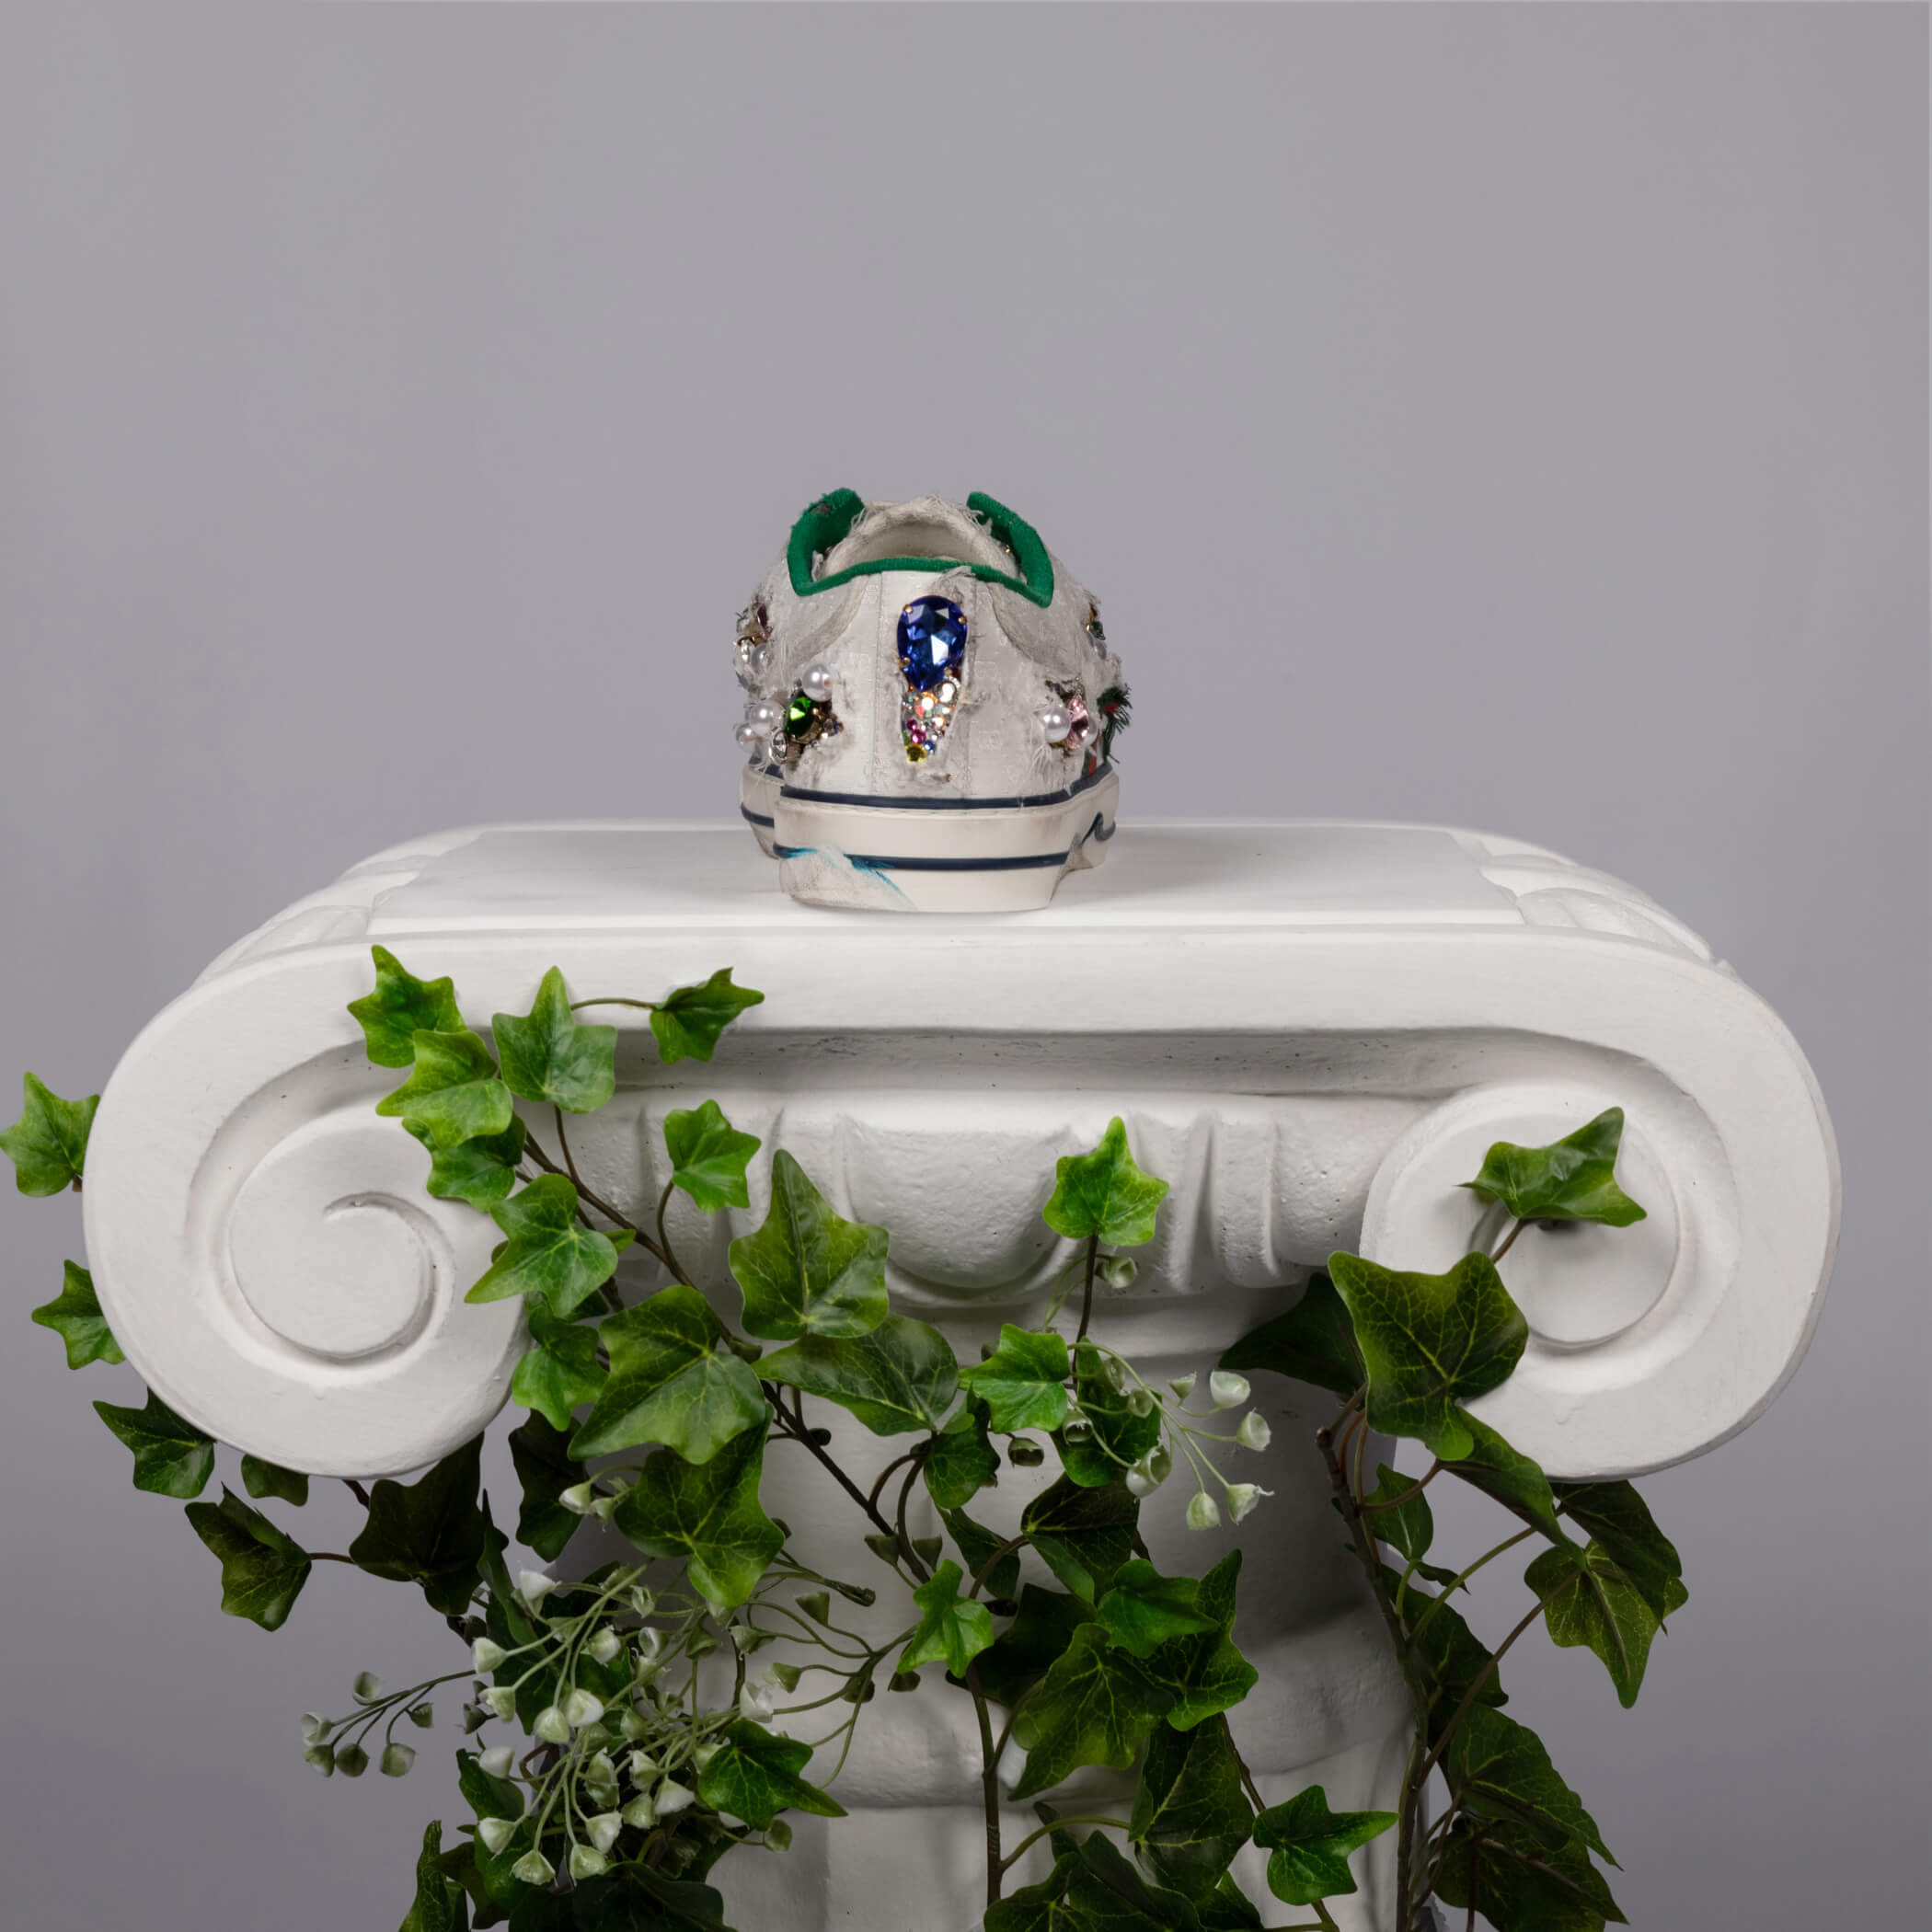 STILL_LIFE_ART_3.jpg image from GUCCI SNEAKER GARAGE RAL7000STUDIO project created on 2020-03-01